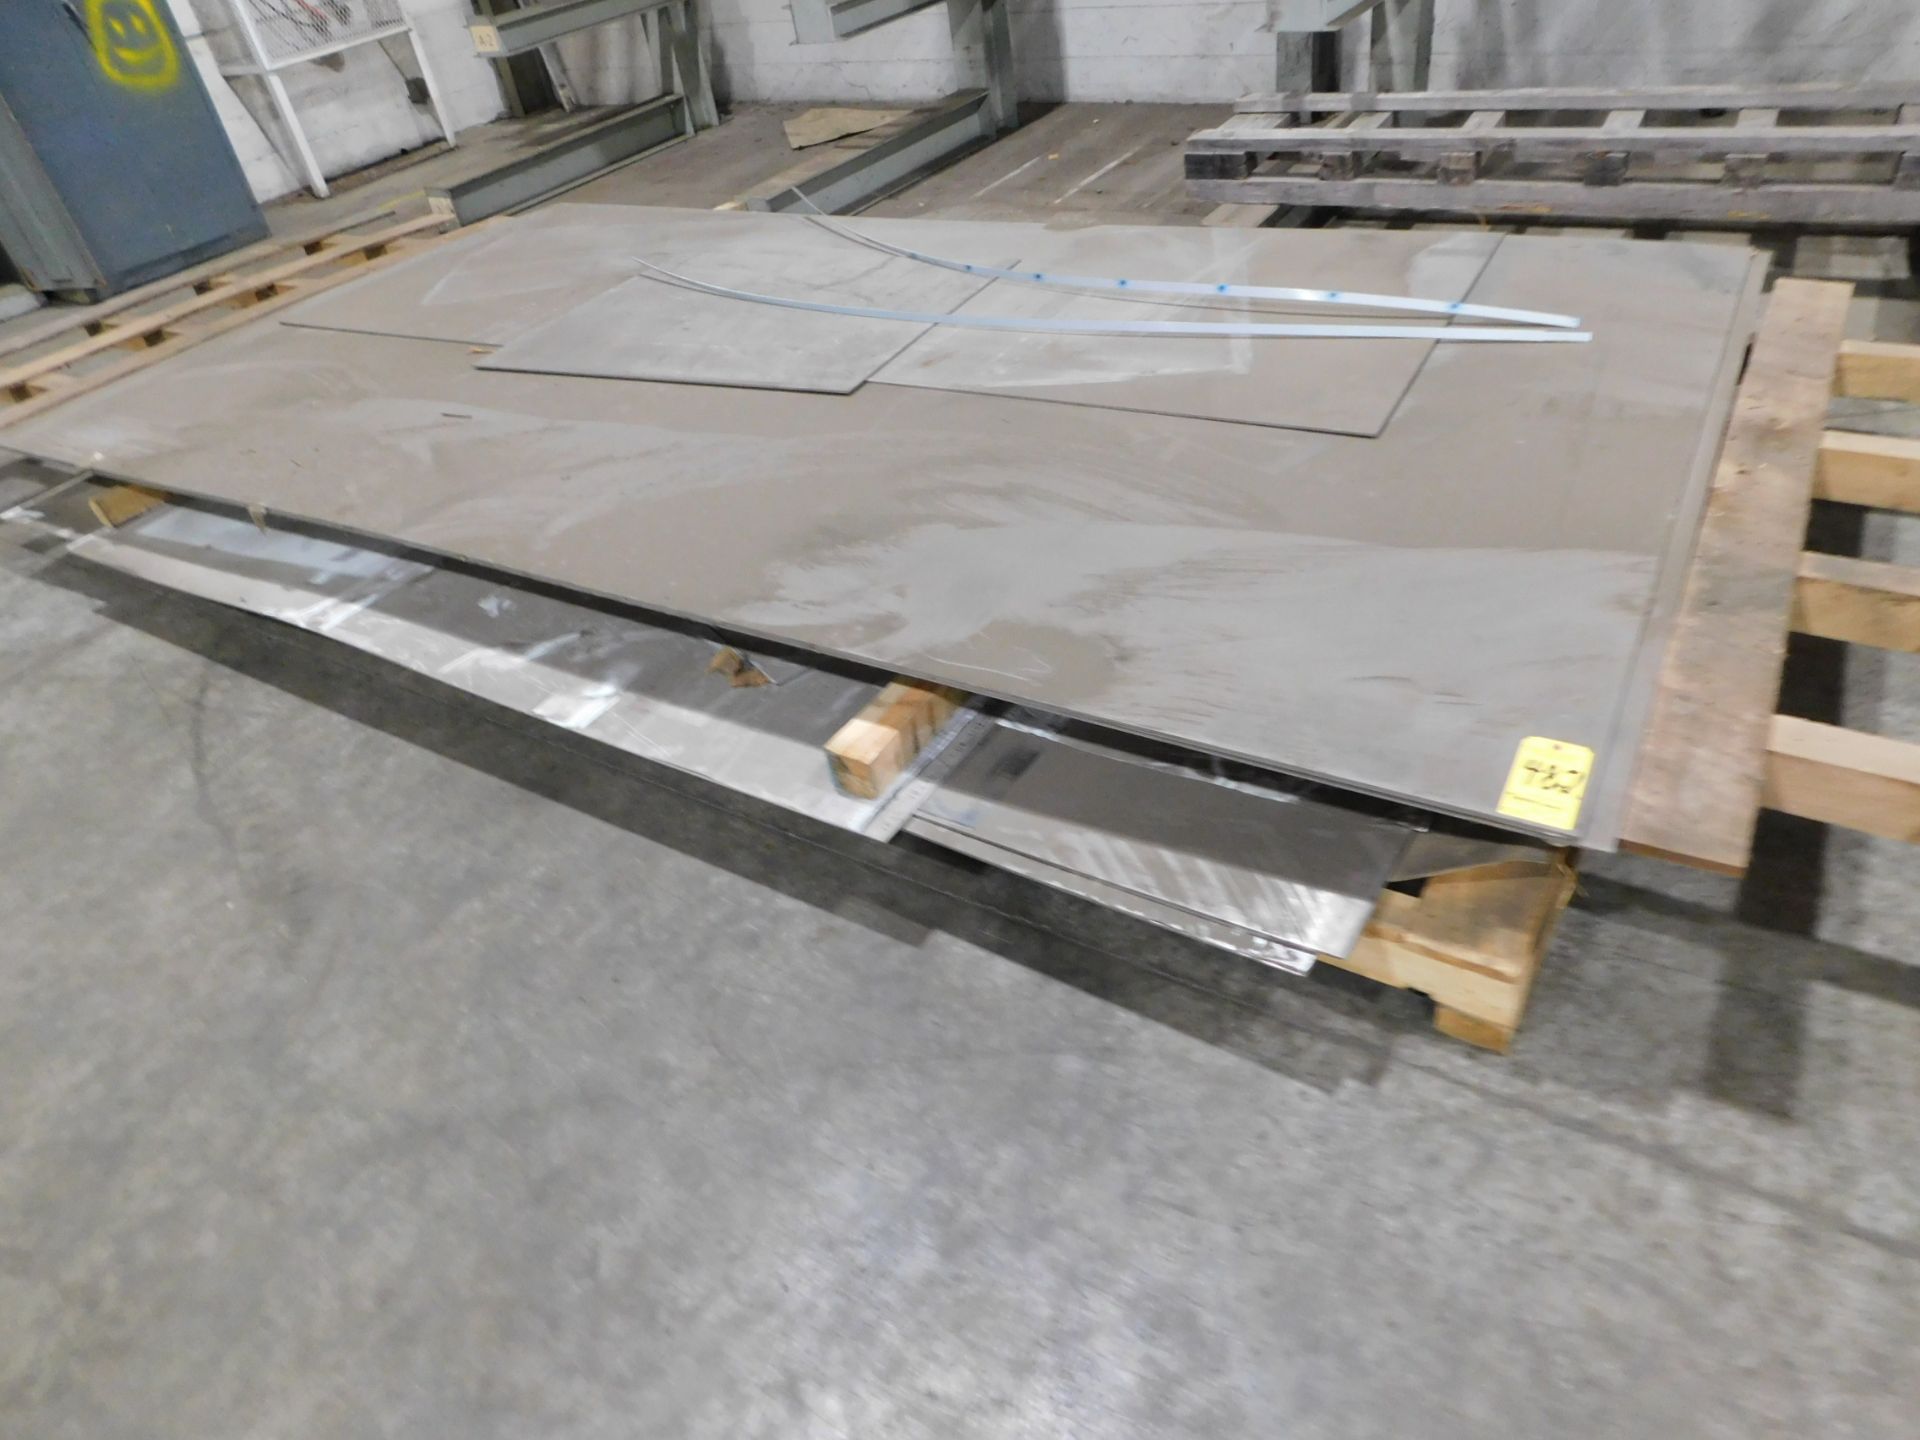 Stainless Steel Sheets, (3) 78" X 144" X 3/16", (1) 48" X 72" X 1/4", (1) 24" X 72" X 1/4", and